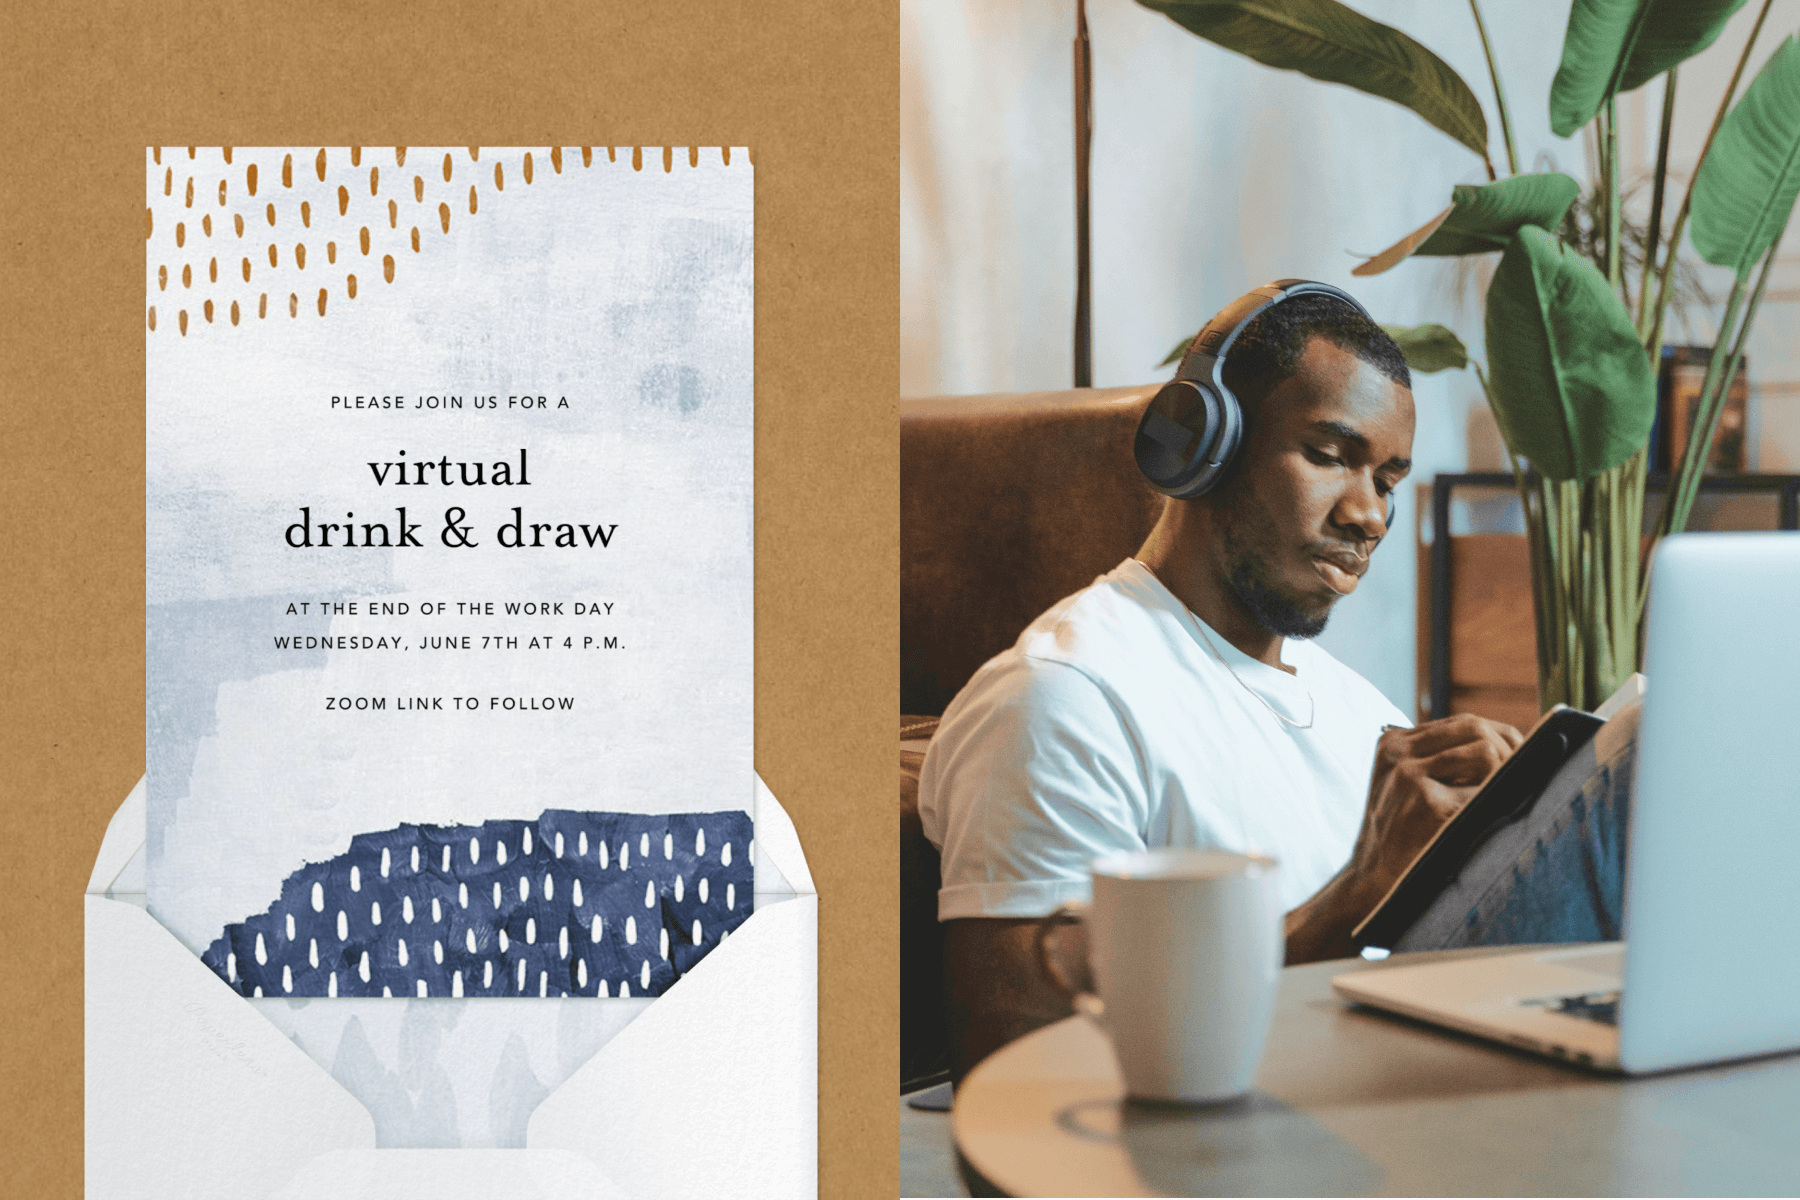 Left: A drink & draw invitation; Right: A man sitting at a table drawing on a pad of paper in front of his laptop.